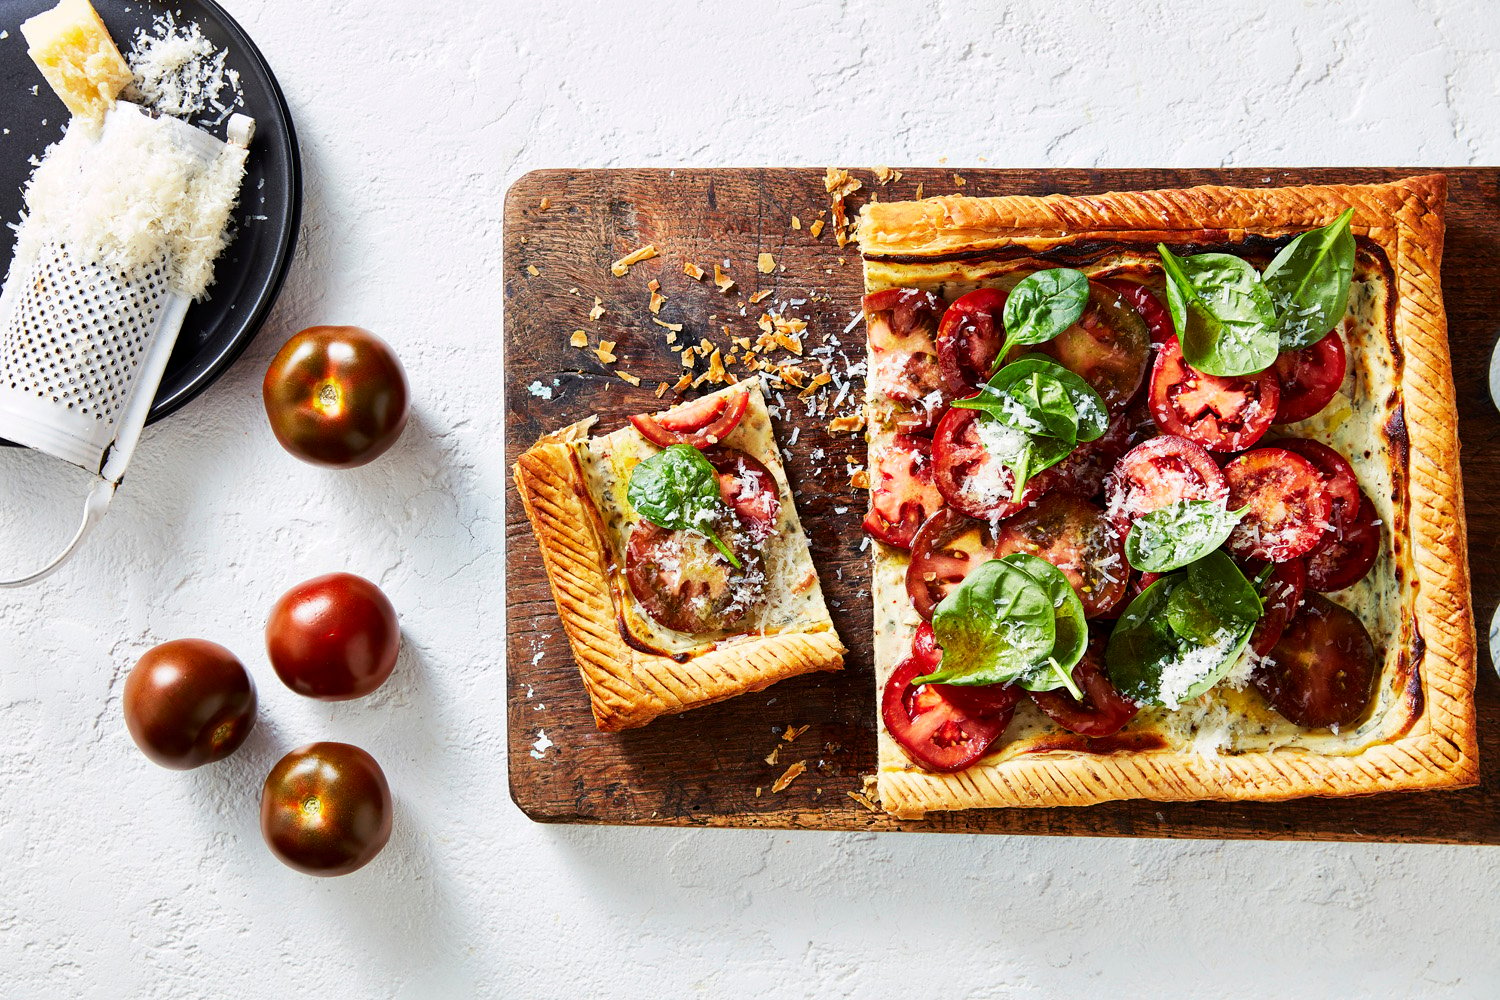 Puff pastry tart topped with sliced Kumato tomatoes, basil and cheese.